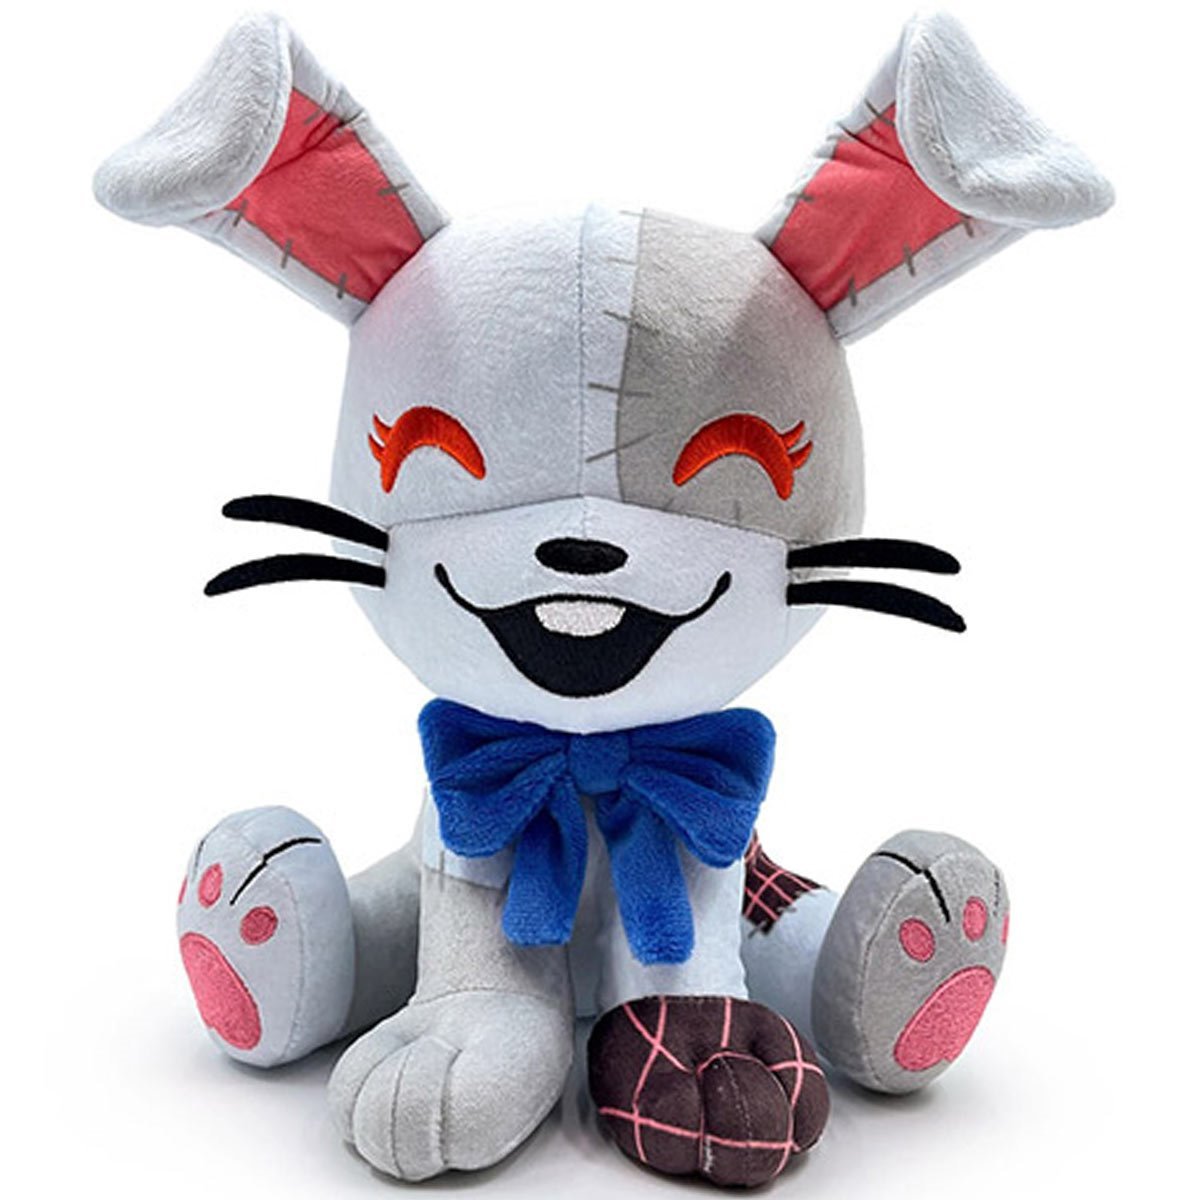 Youtooz: Five Nights at Freddy's Collection - Chibi Foxy 9 Inch